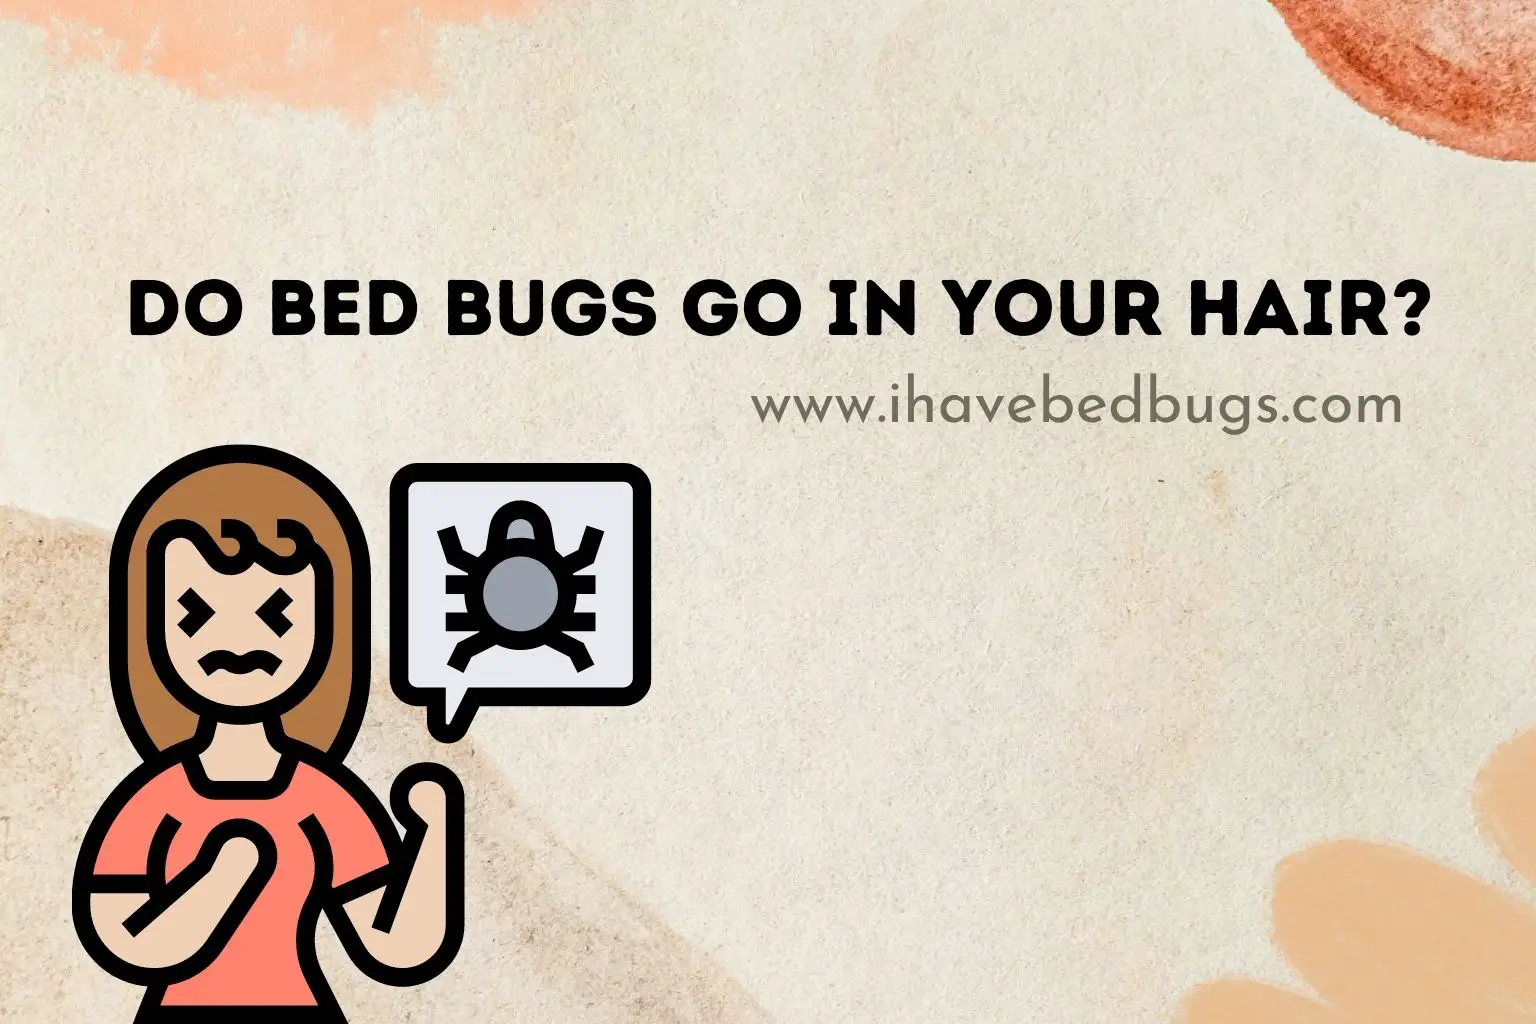 Do bed bugs go in your hair